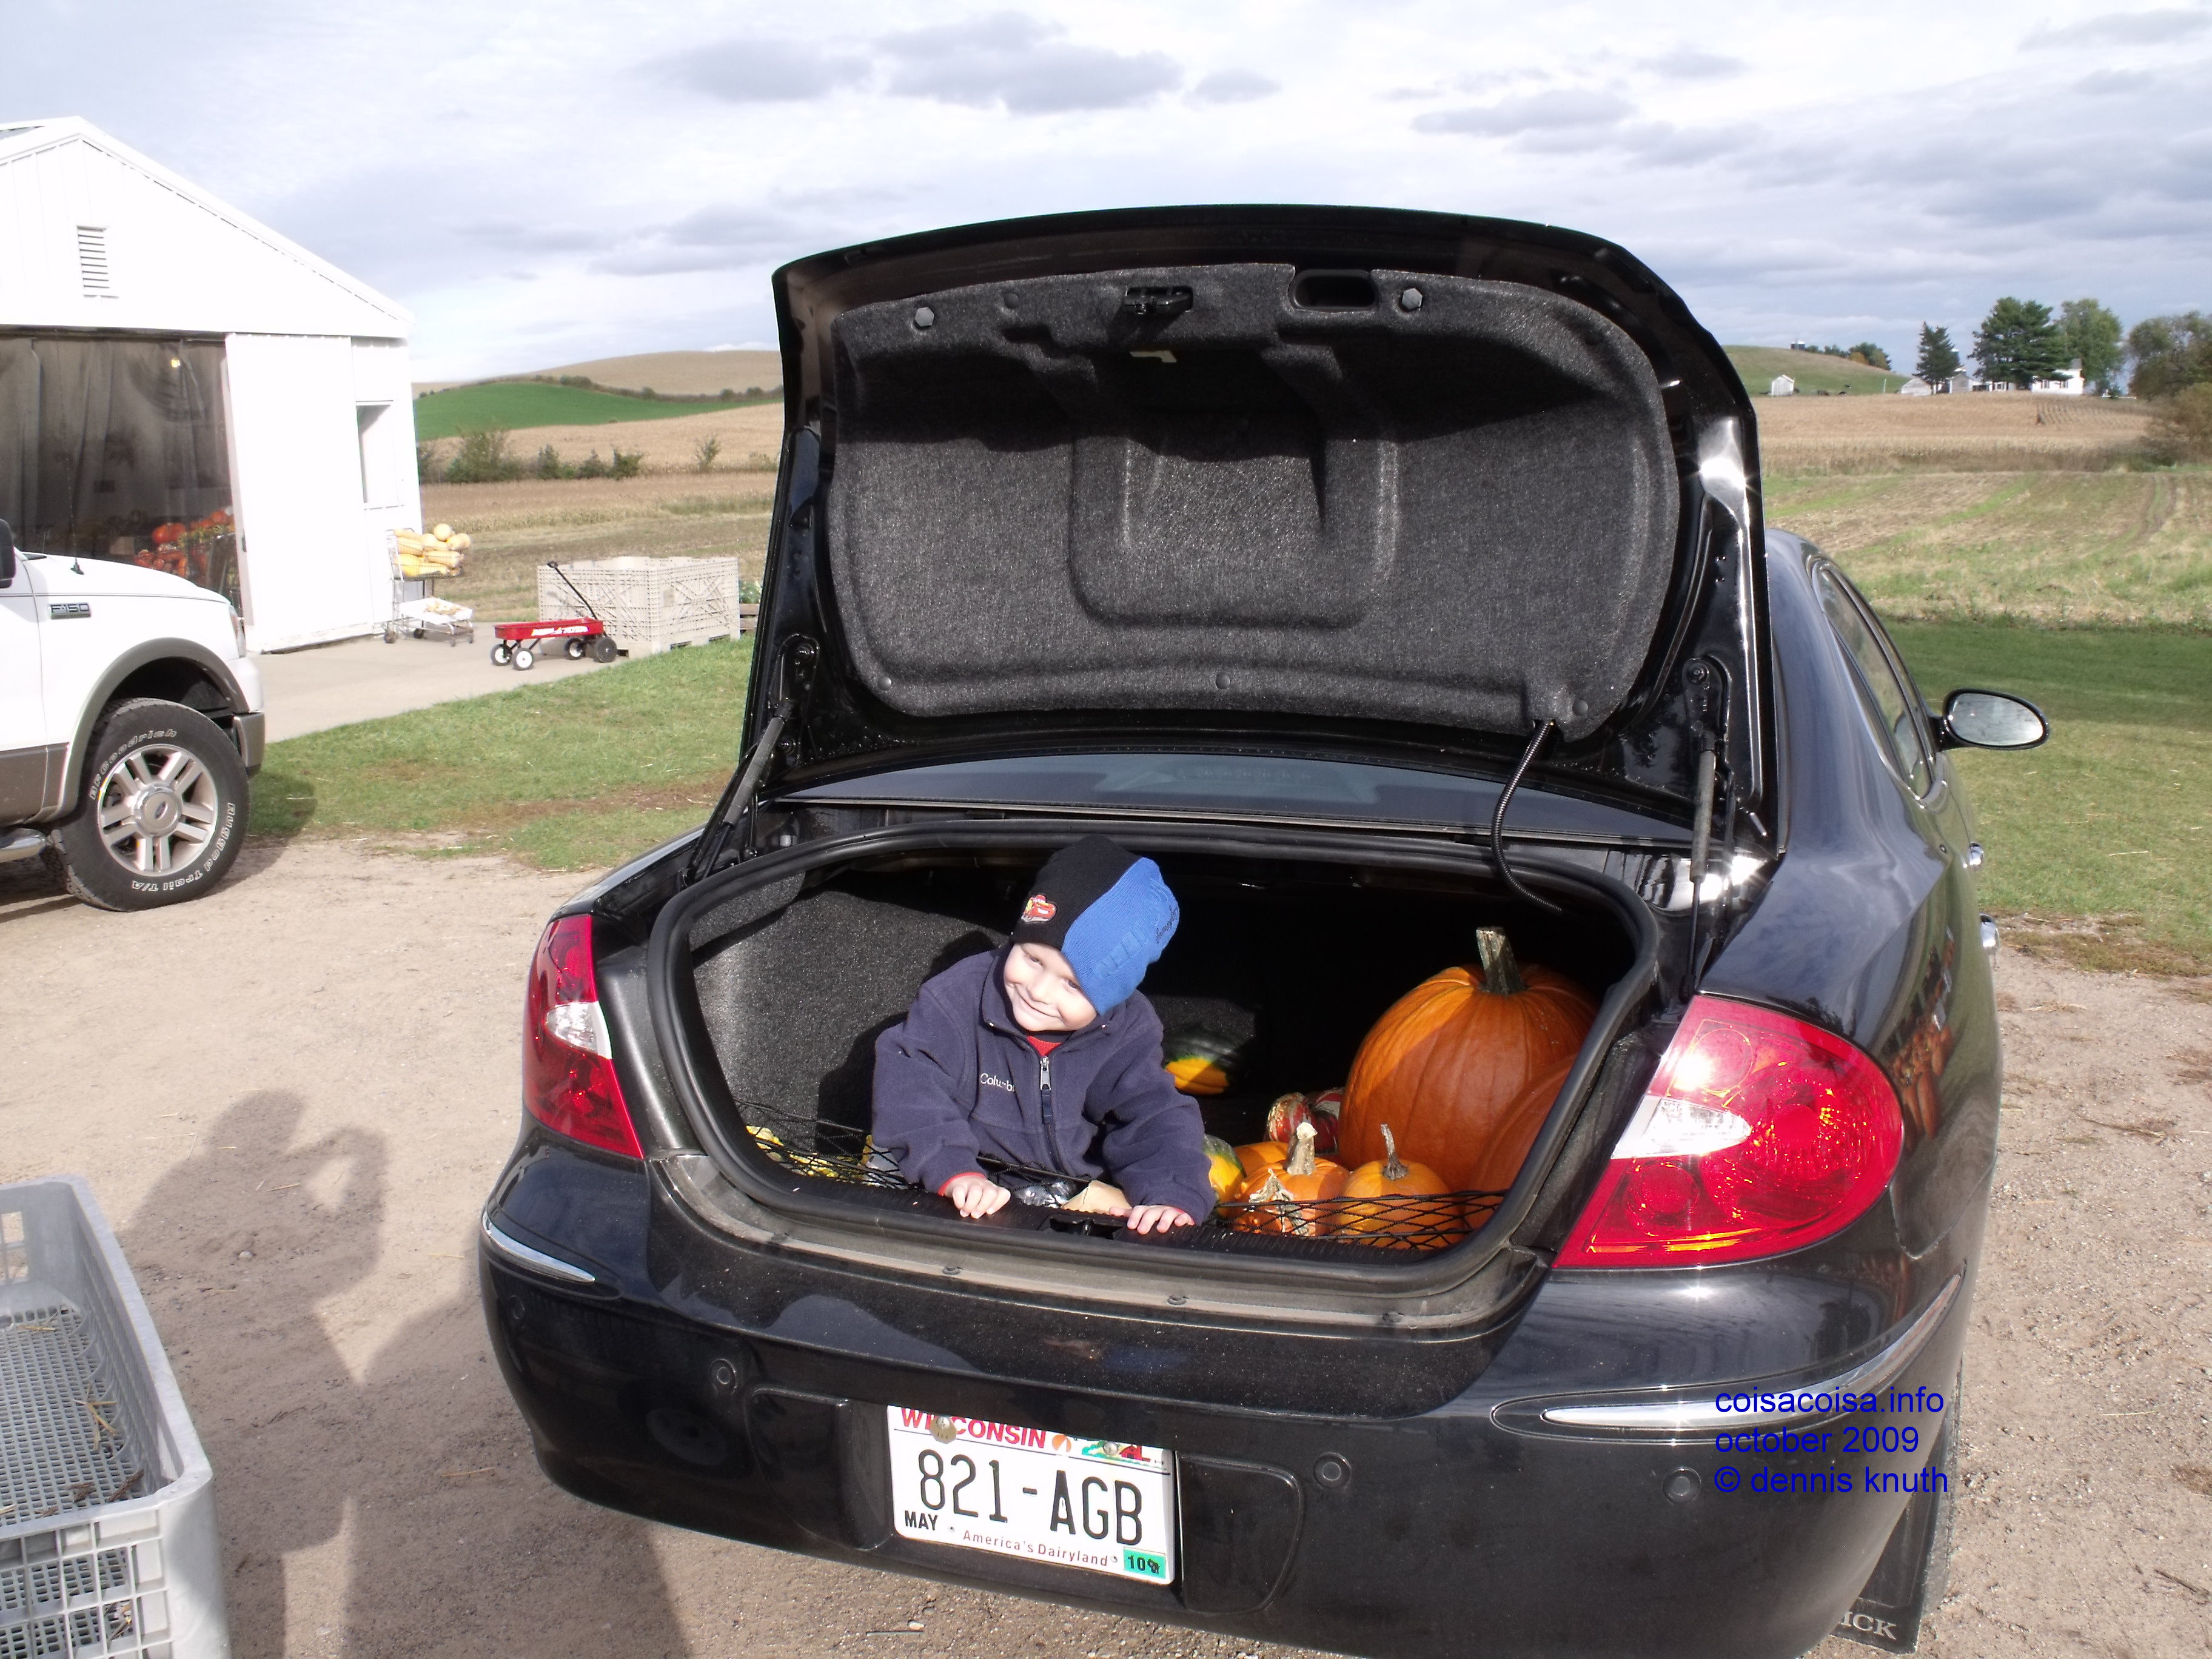 Jared loads the pumpkins picked into the car trunk